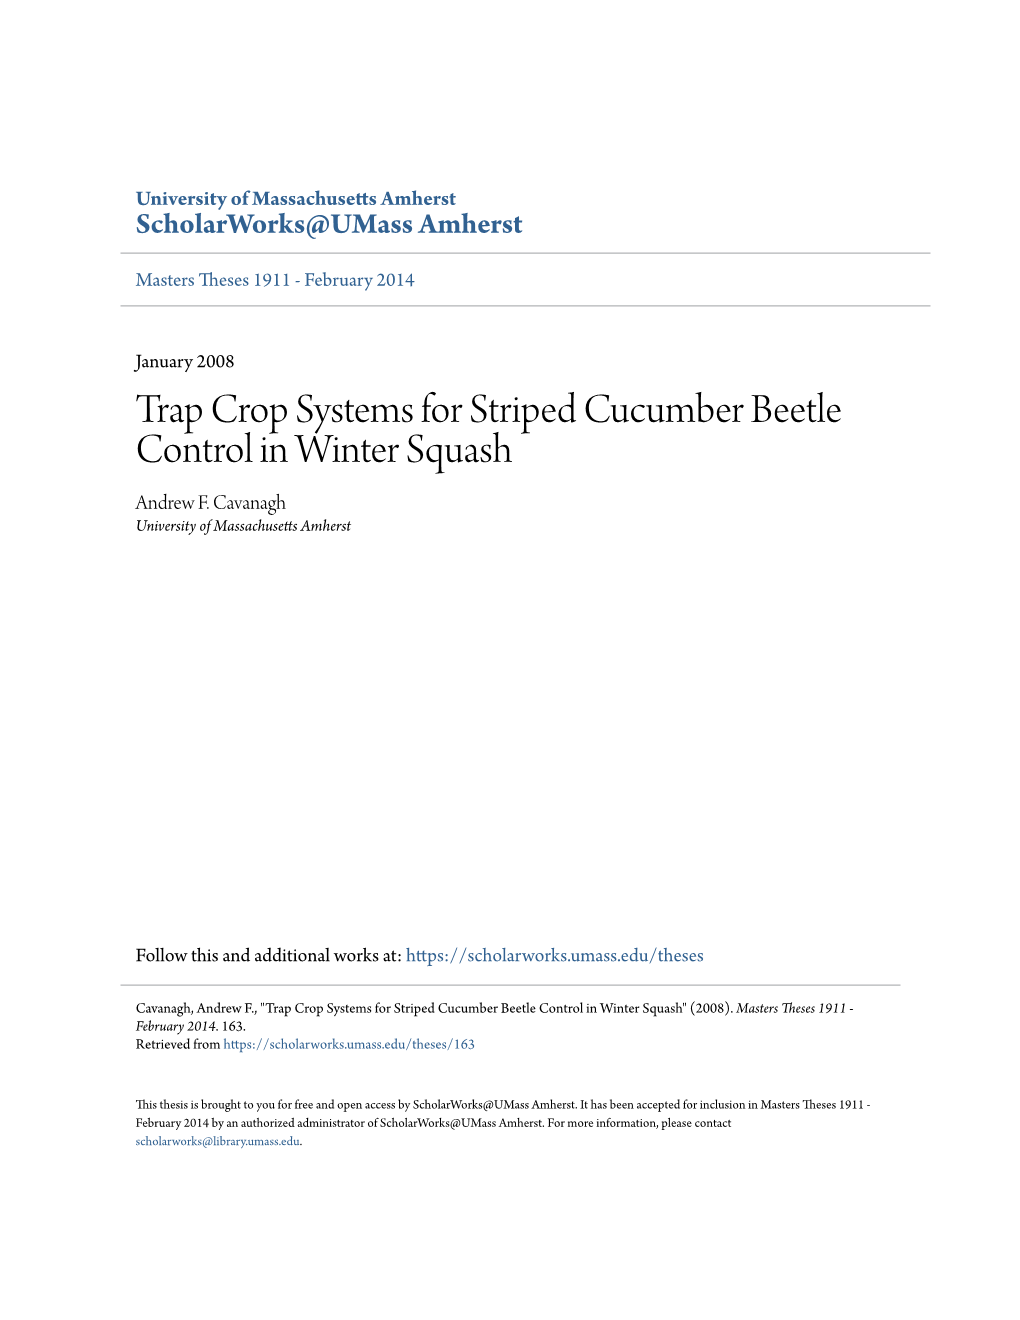 Trap Crop Systems for Striped Cucumber Beetle Control in Winter Squash Andrew F